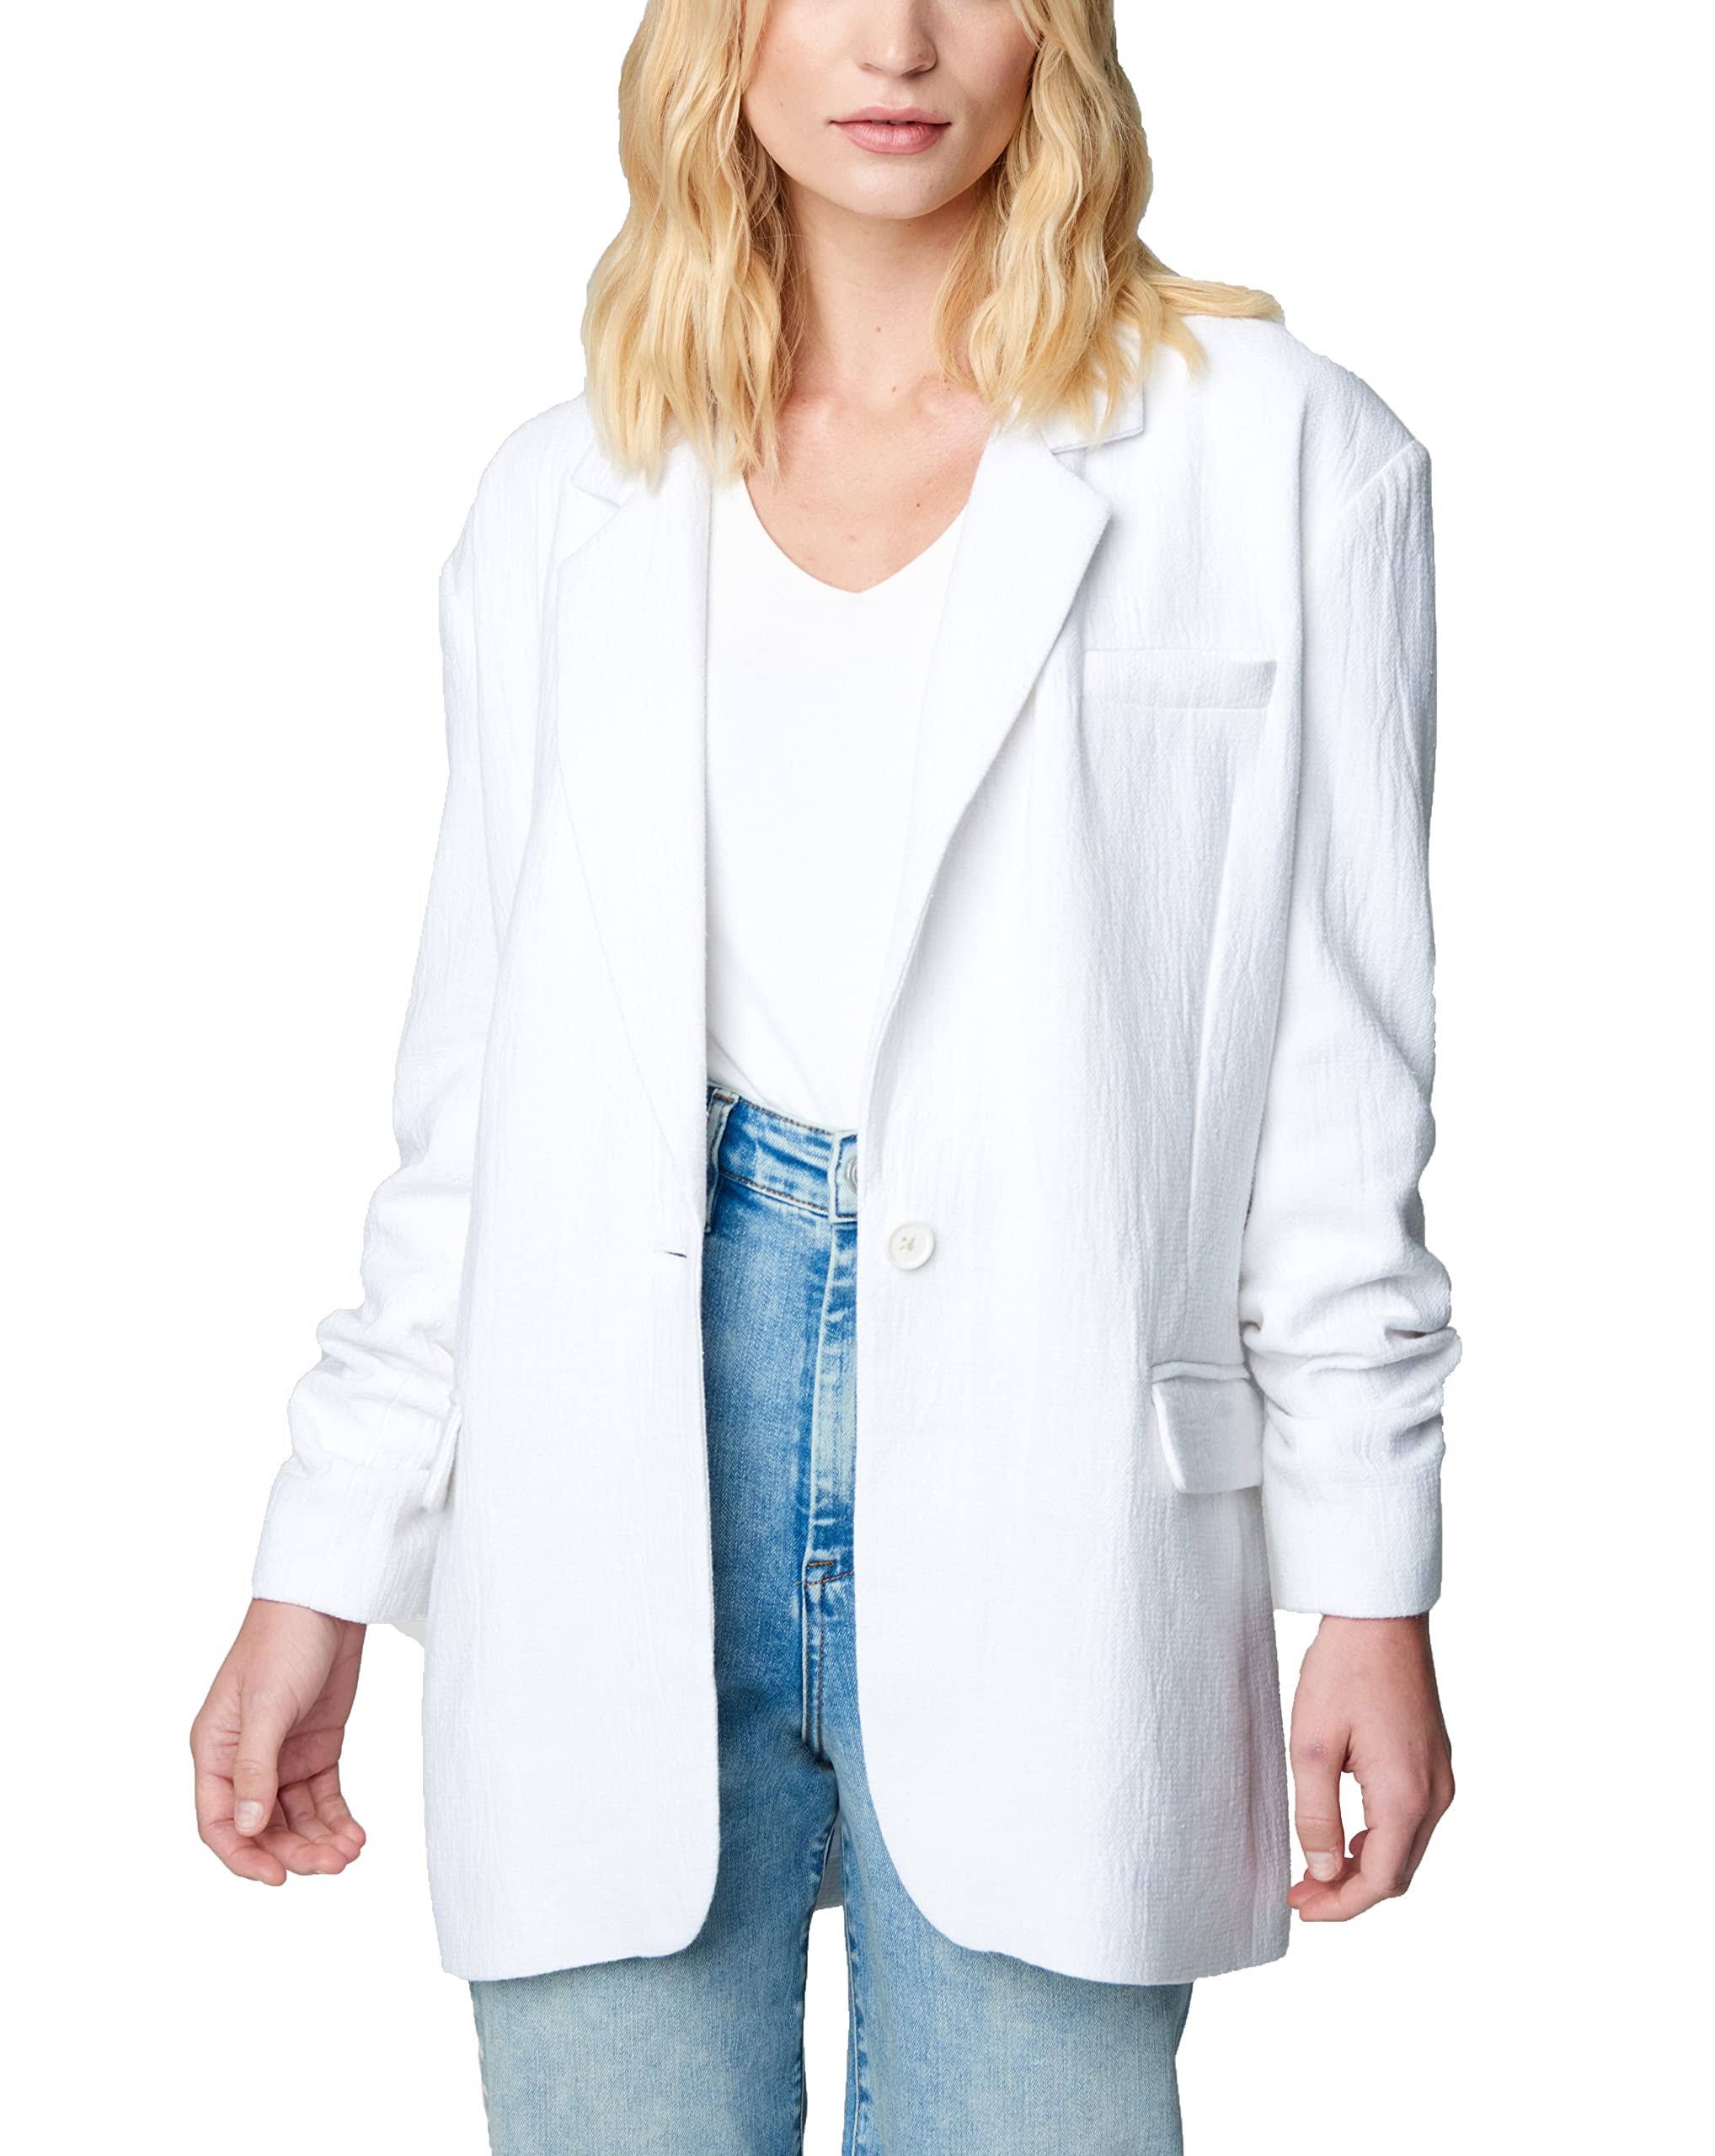 Oversized White Blazer for Women: Relaxed Fit and Notch Lapel Collar | Image